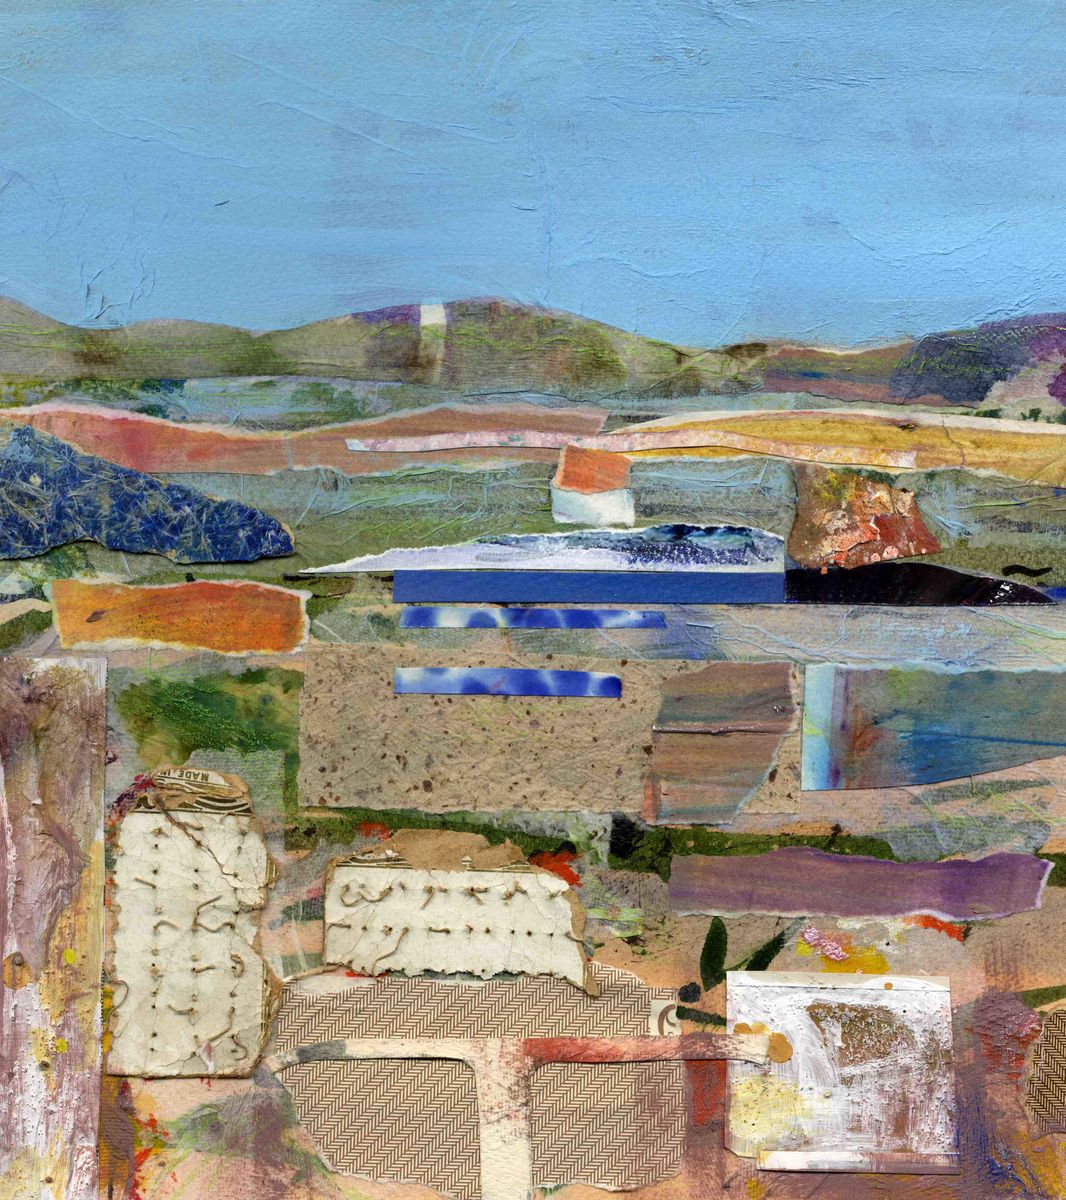 This mixed media picture by artist Jane Glue from Orkney, Scotland was created using collage to represent the landscape and fields of Orkney. I have used handmade papers and vintage knitting patterns in the foreground.